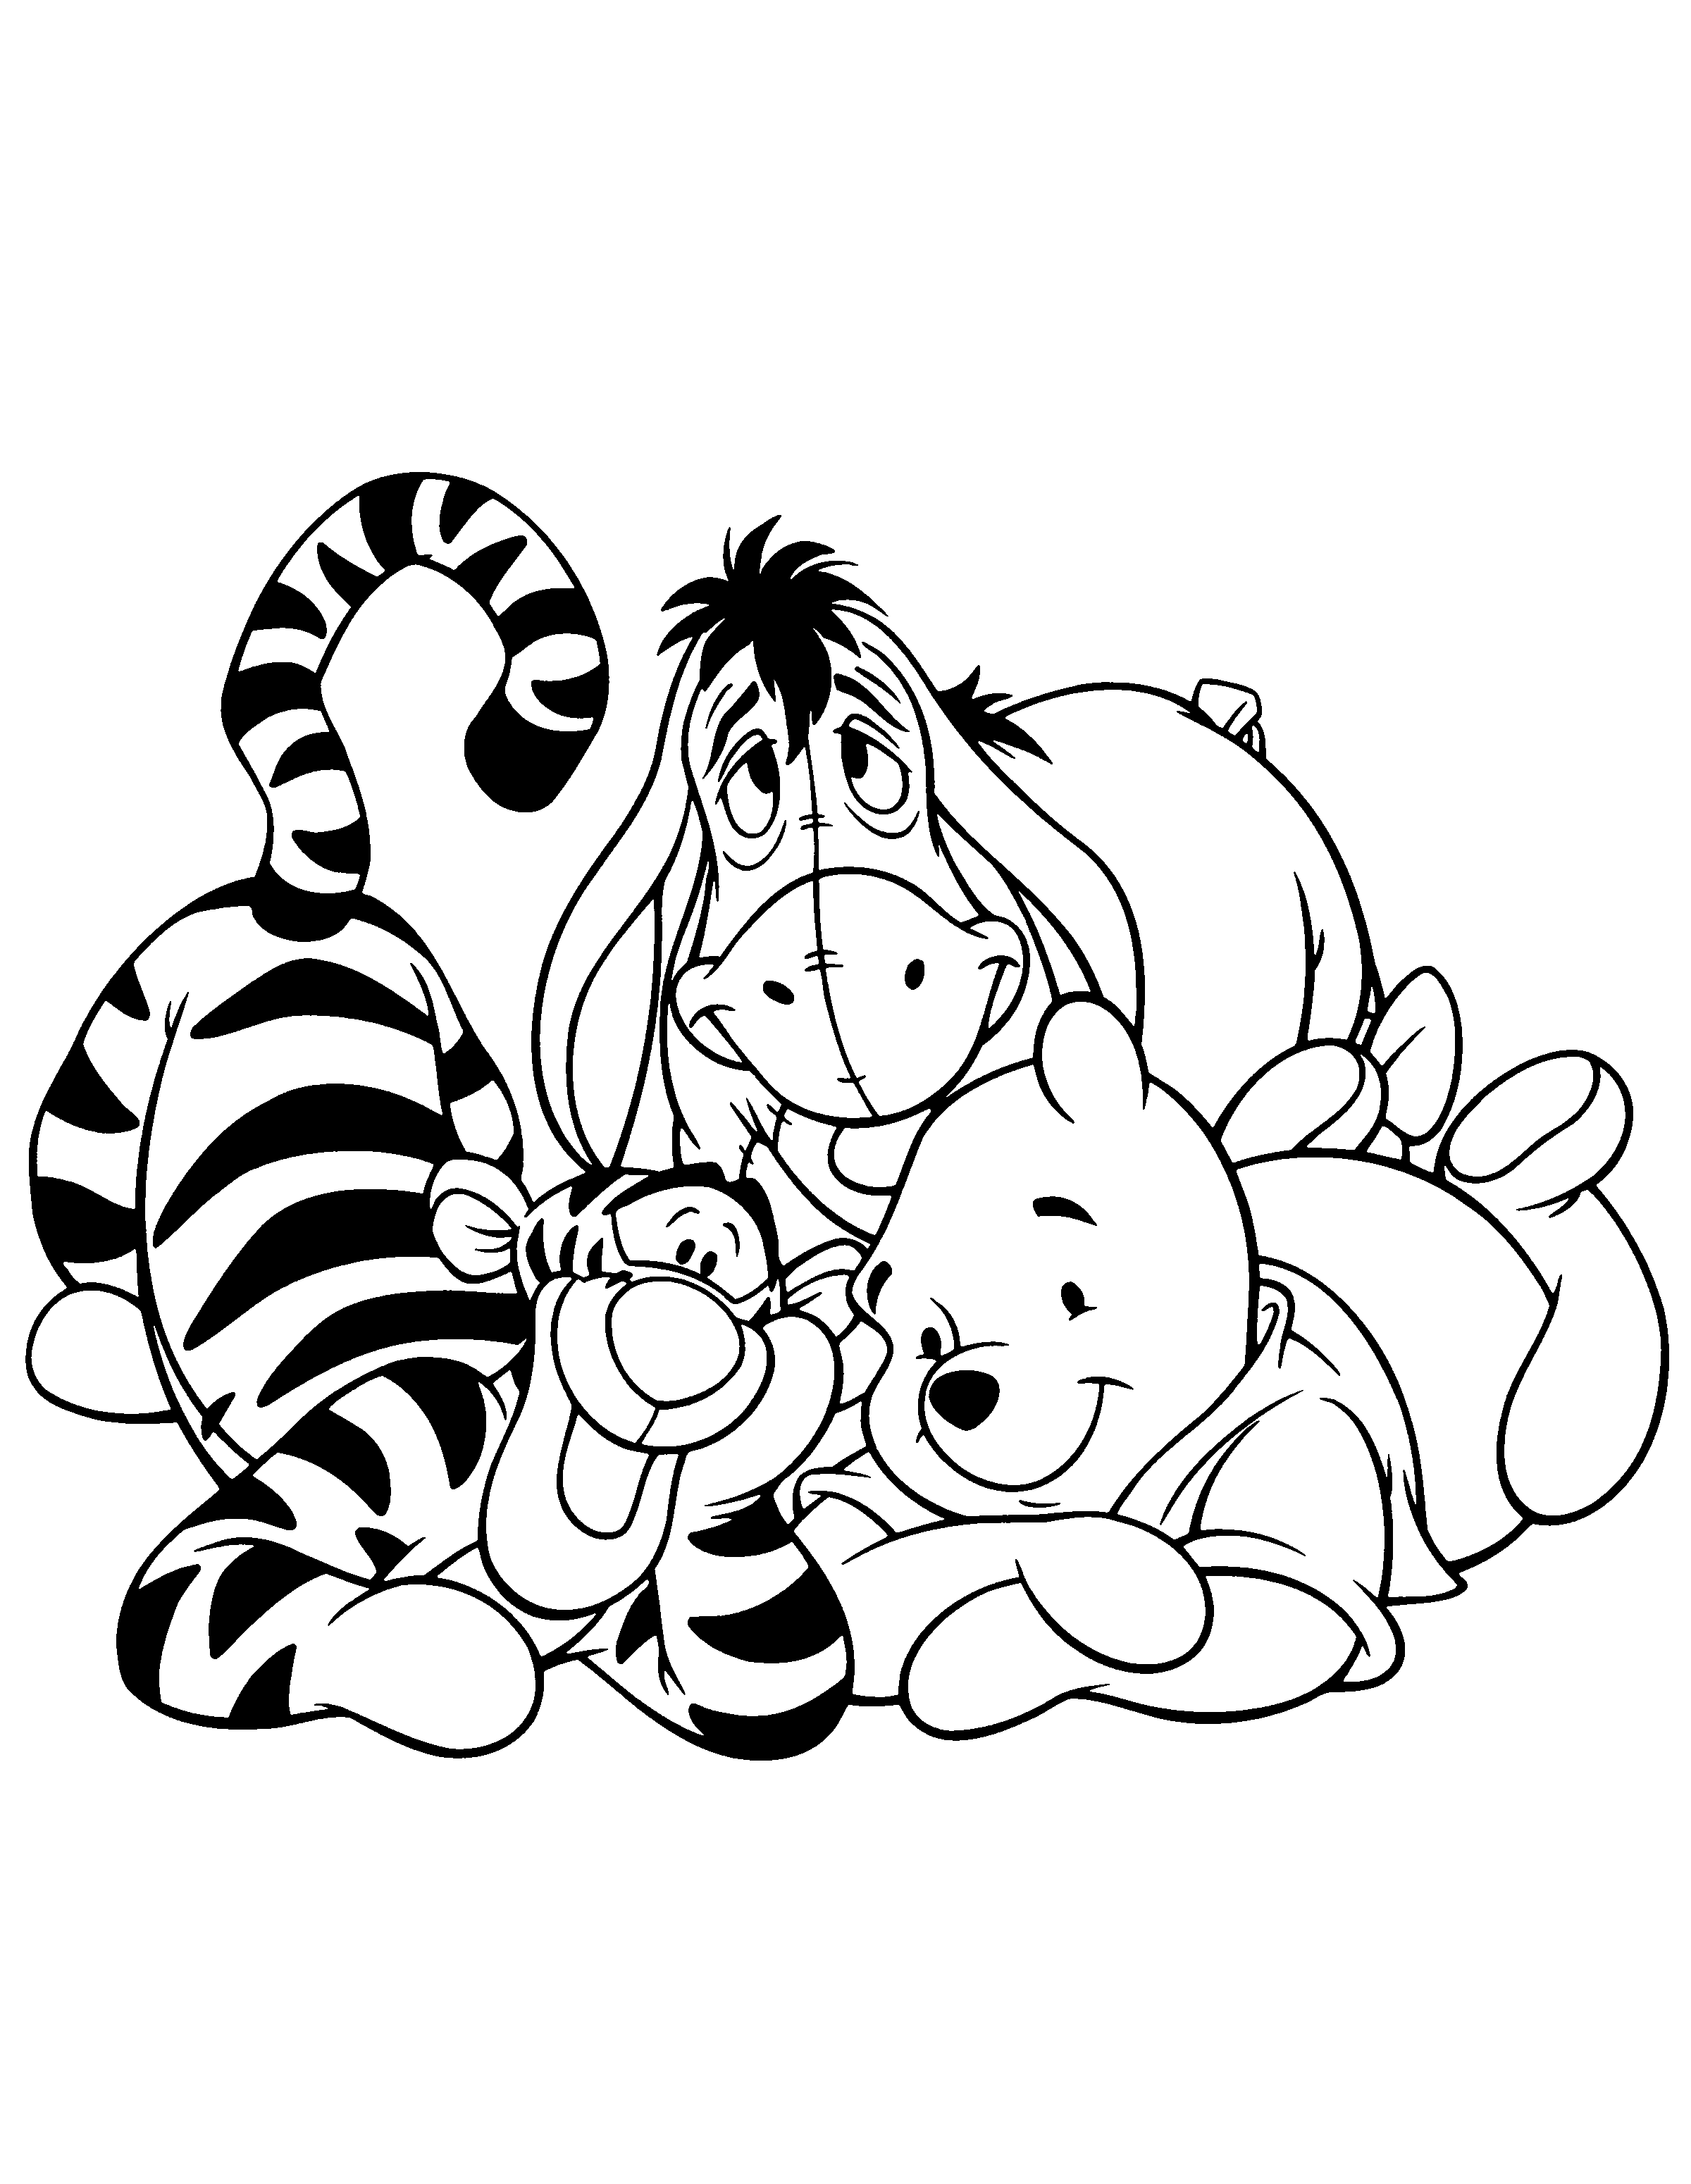 Coloring Page - Winnie the pooh coloring pages 58